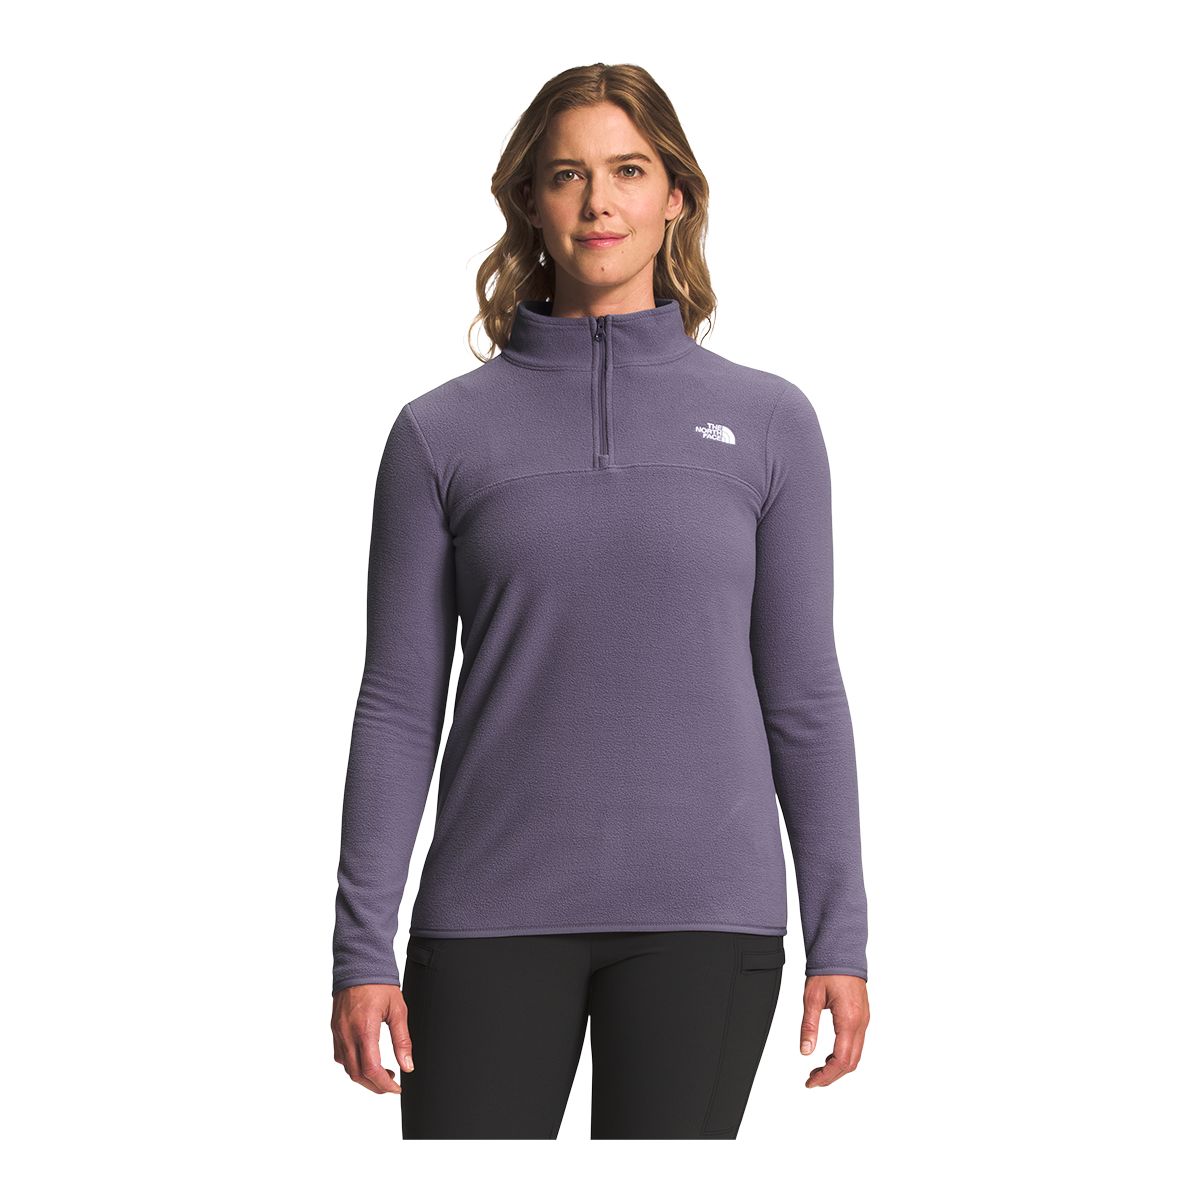 The North Face Women's Tka Glacier 1/4 Zip Long Sleeve Top